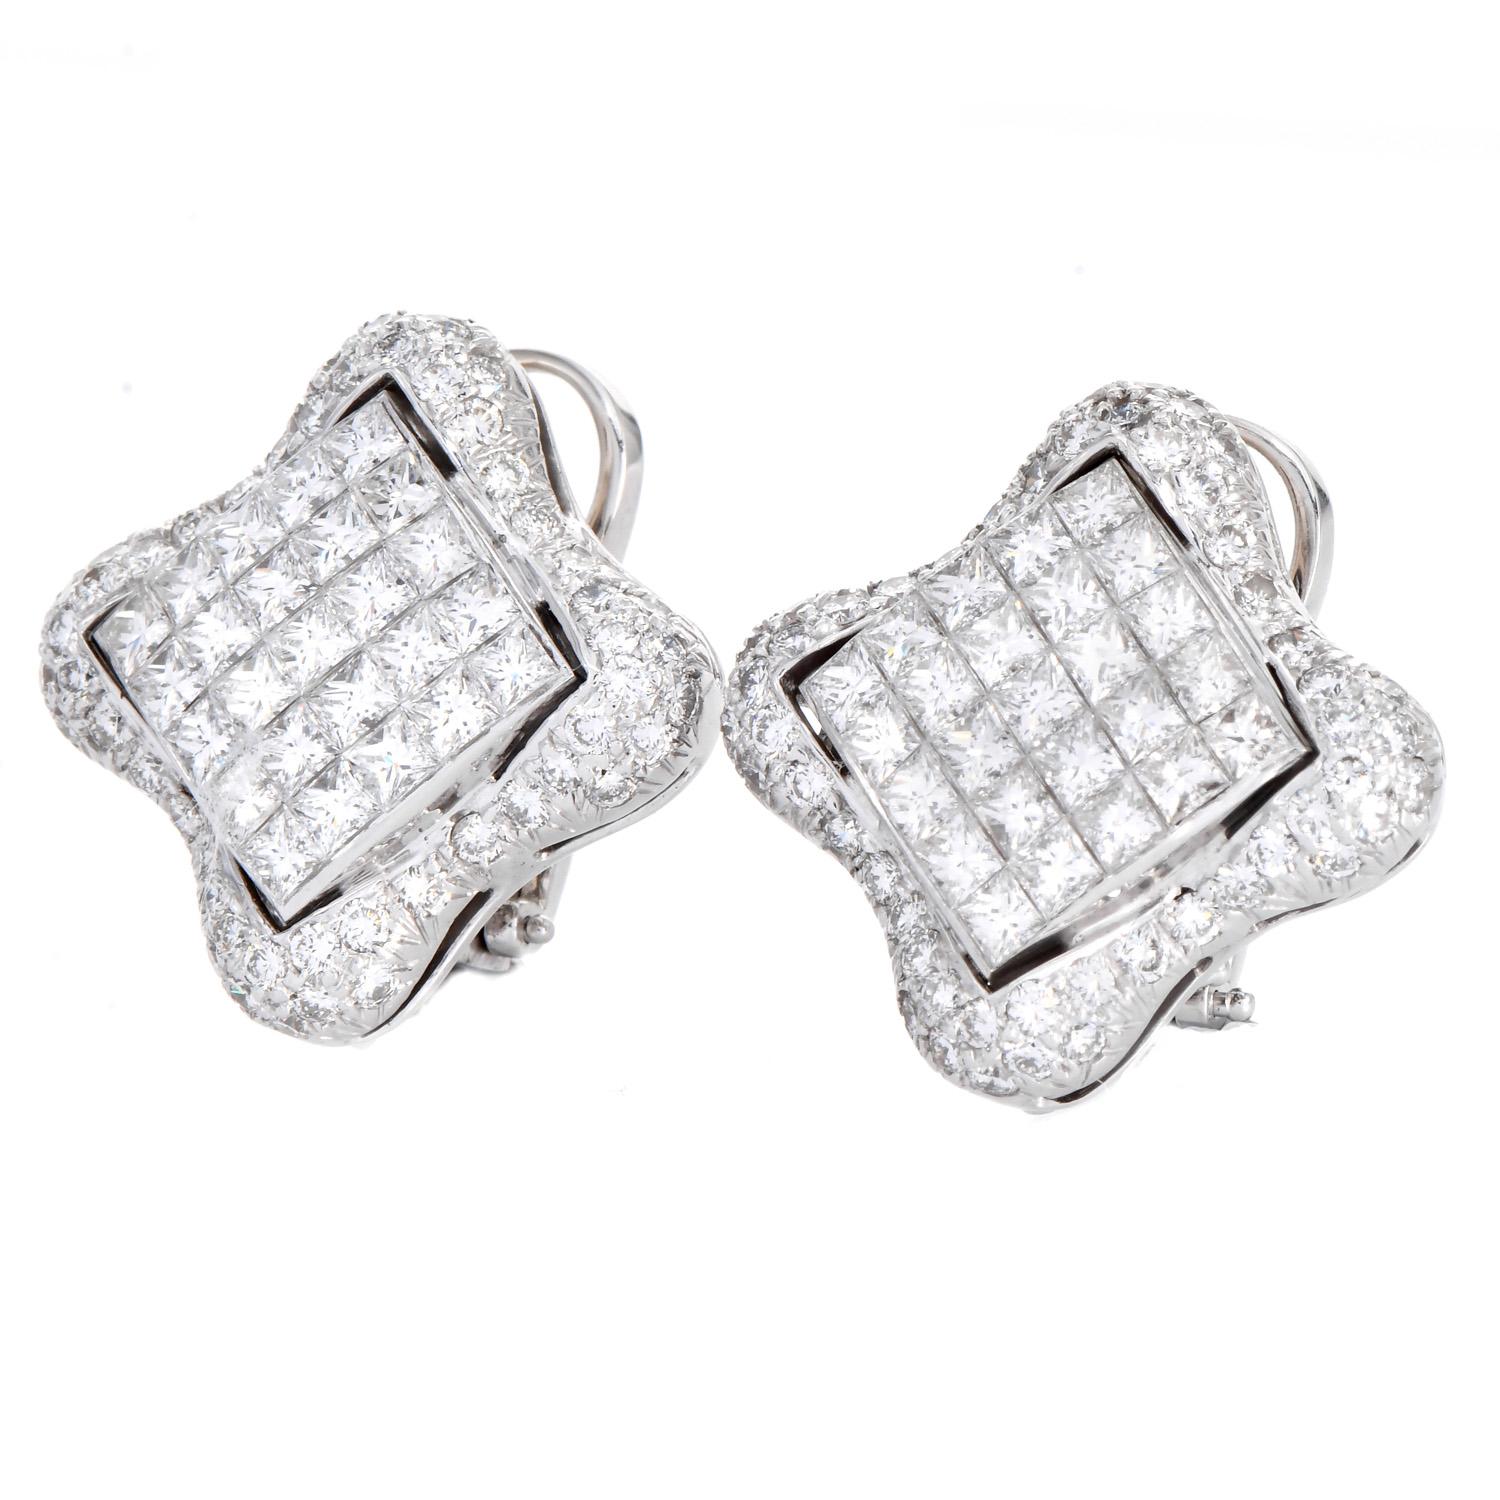 Stunning Estate Quatrefoil Statement Earrings, featuring a total of 6.28 carats of natural diamonds set in 18K white gold.
square-cut diamonds at the center, encircled by a delicately soft-cornered clover motif design with pave set